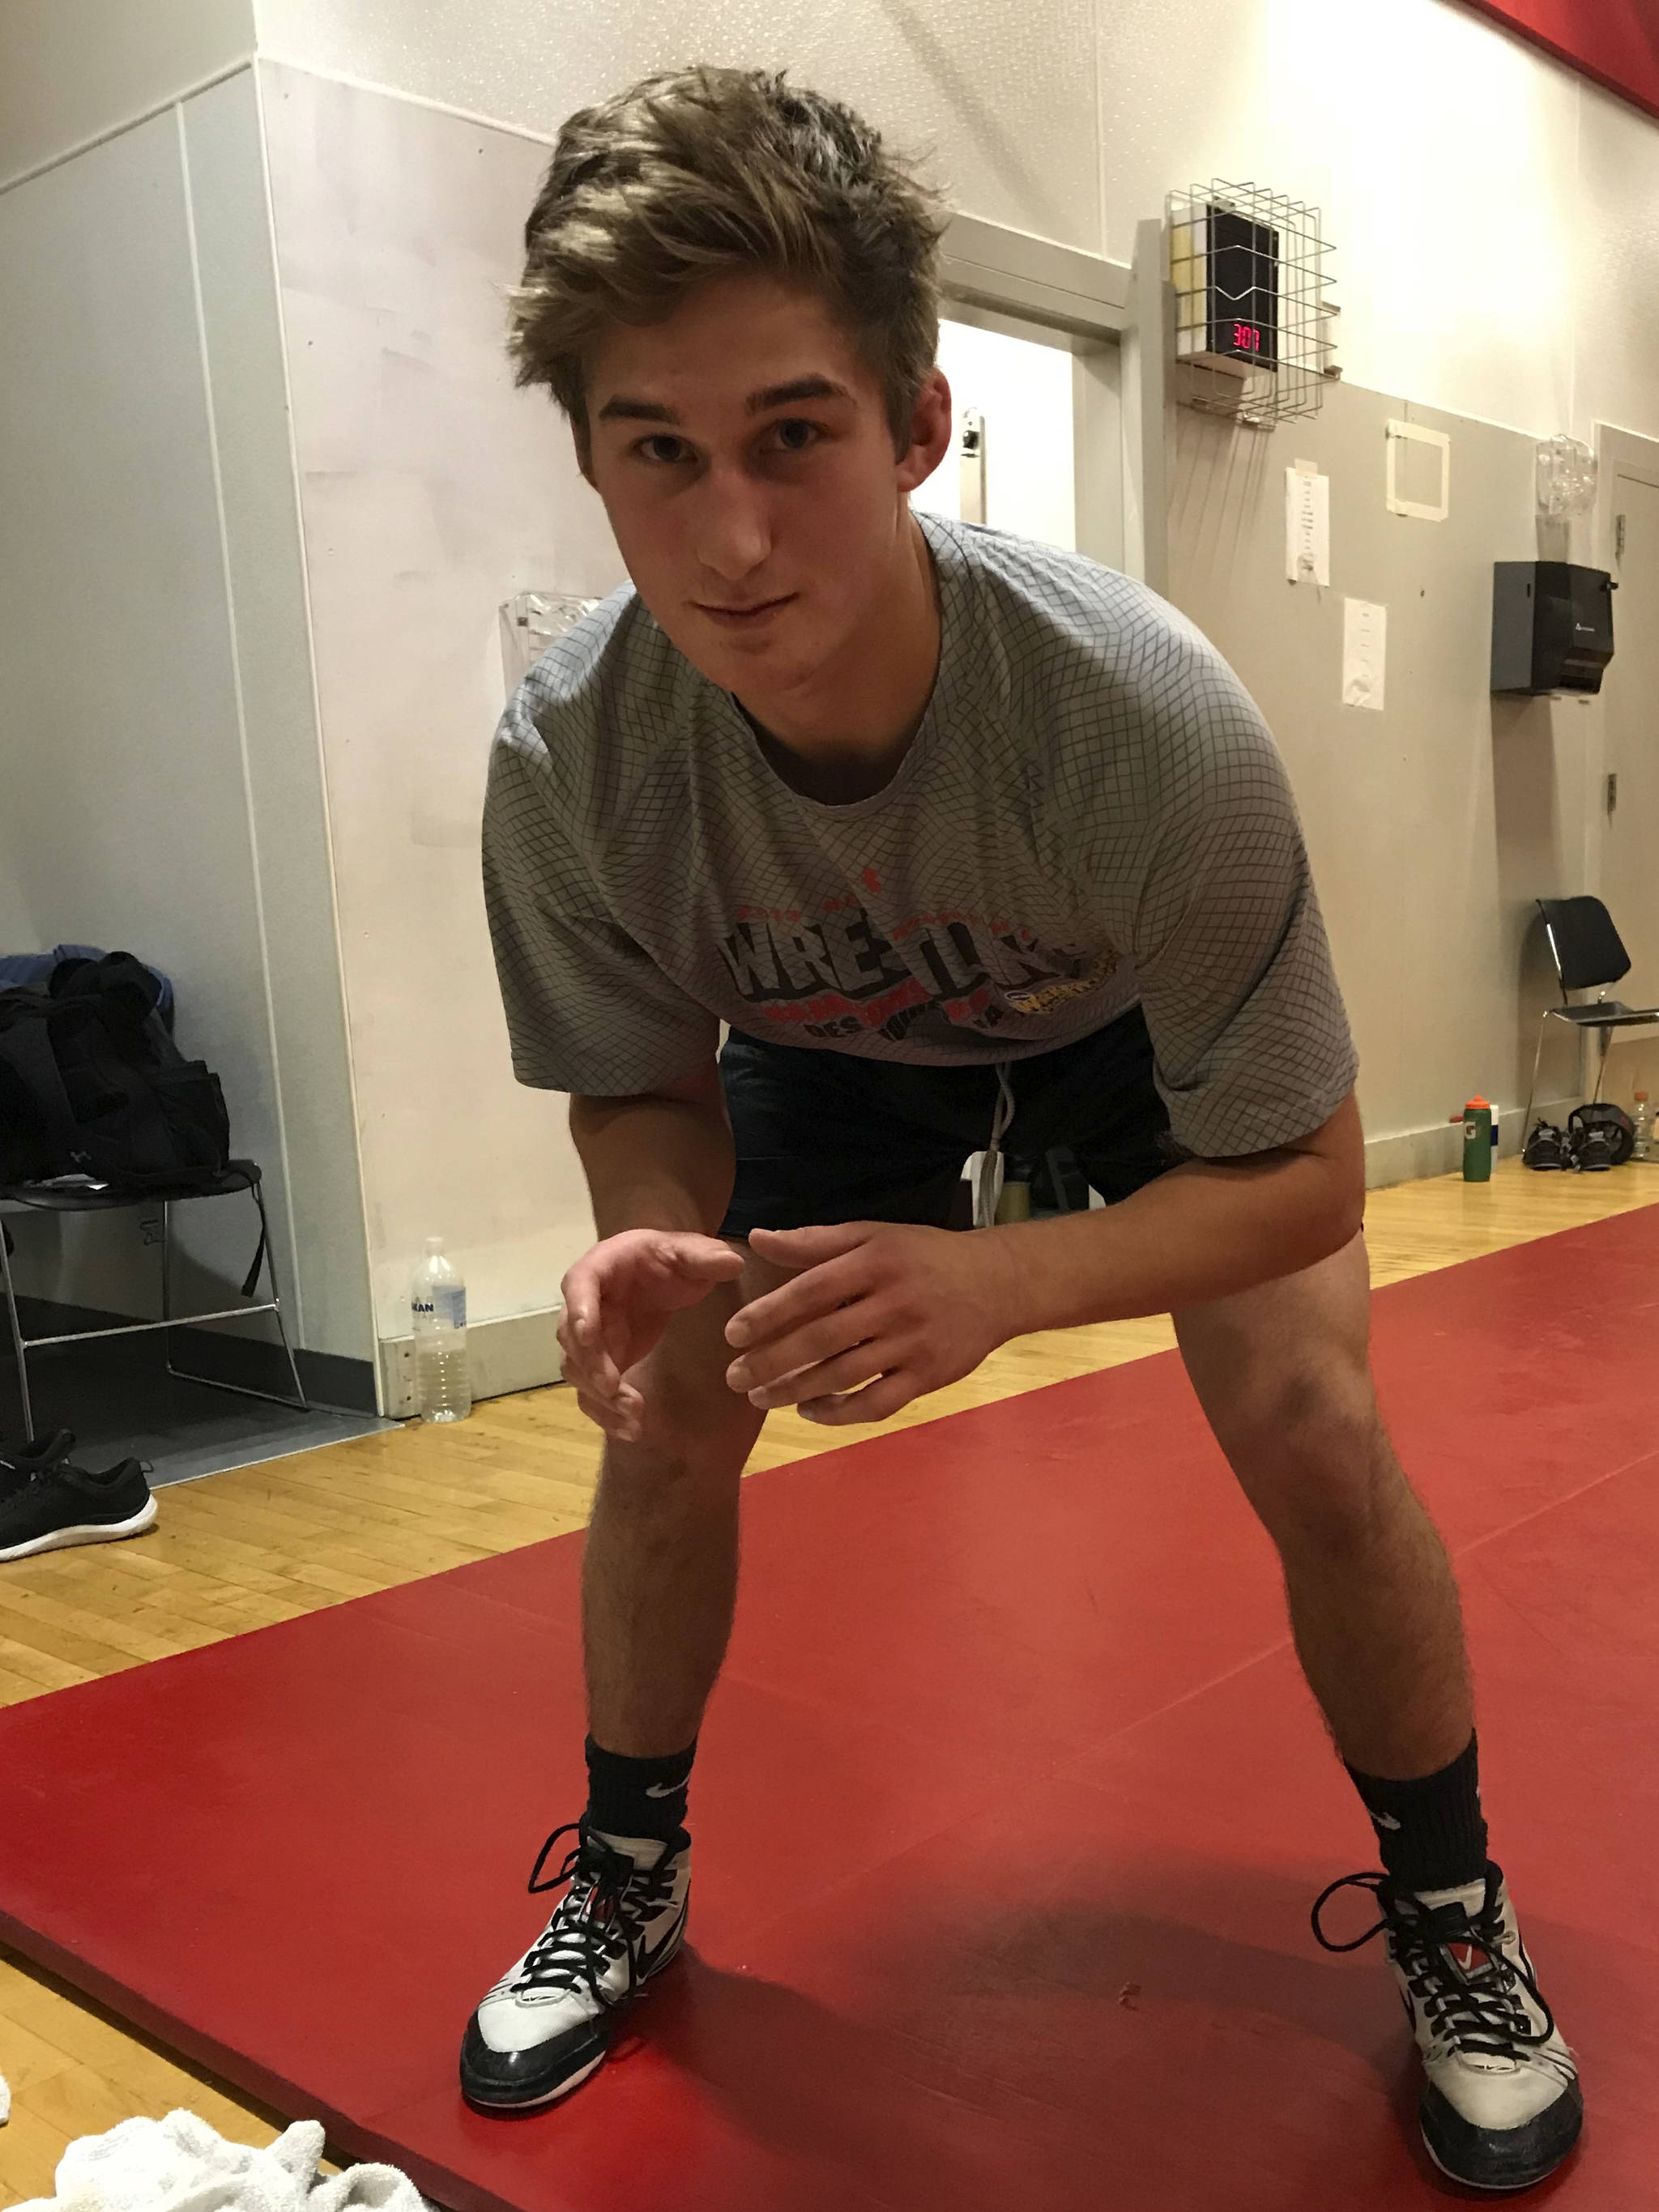 Mount Si Wildcats senior wrestler Spencer Marenco went 1-2 at the Mat Classic Class 4A state wrestling tournament during his junior season. Marenco said his goal this season is to win a state championship in his final year of high school wrestling. Shaun Scott, staff photo